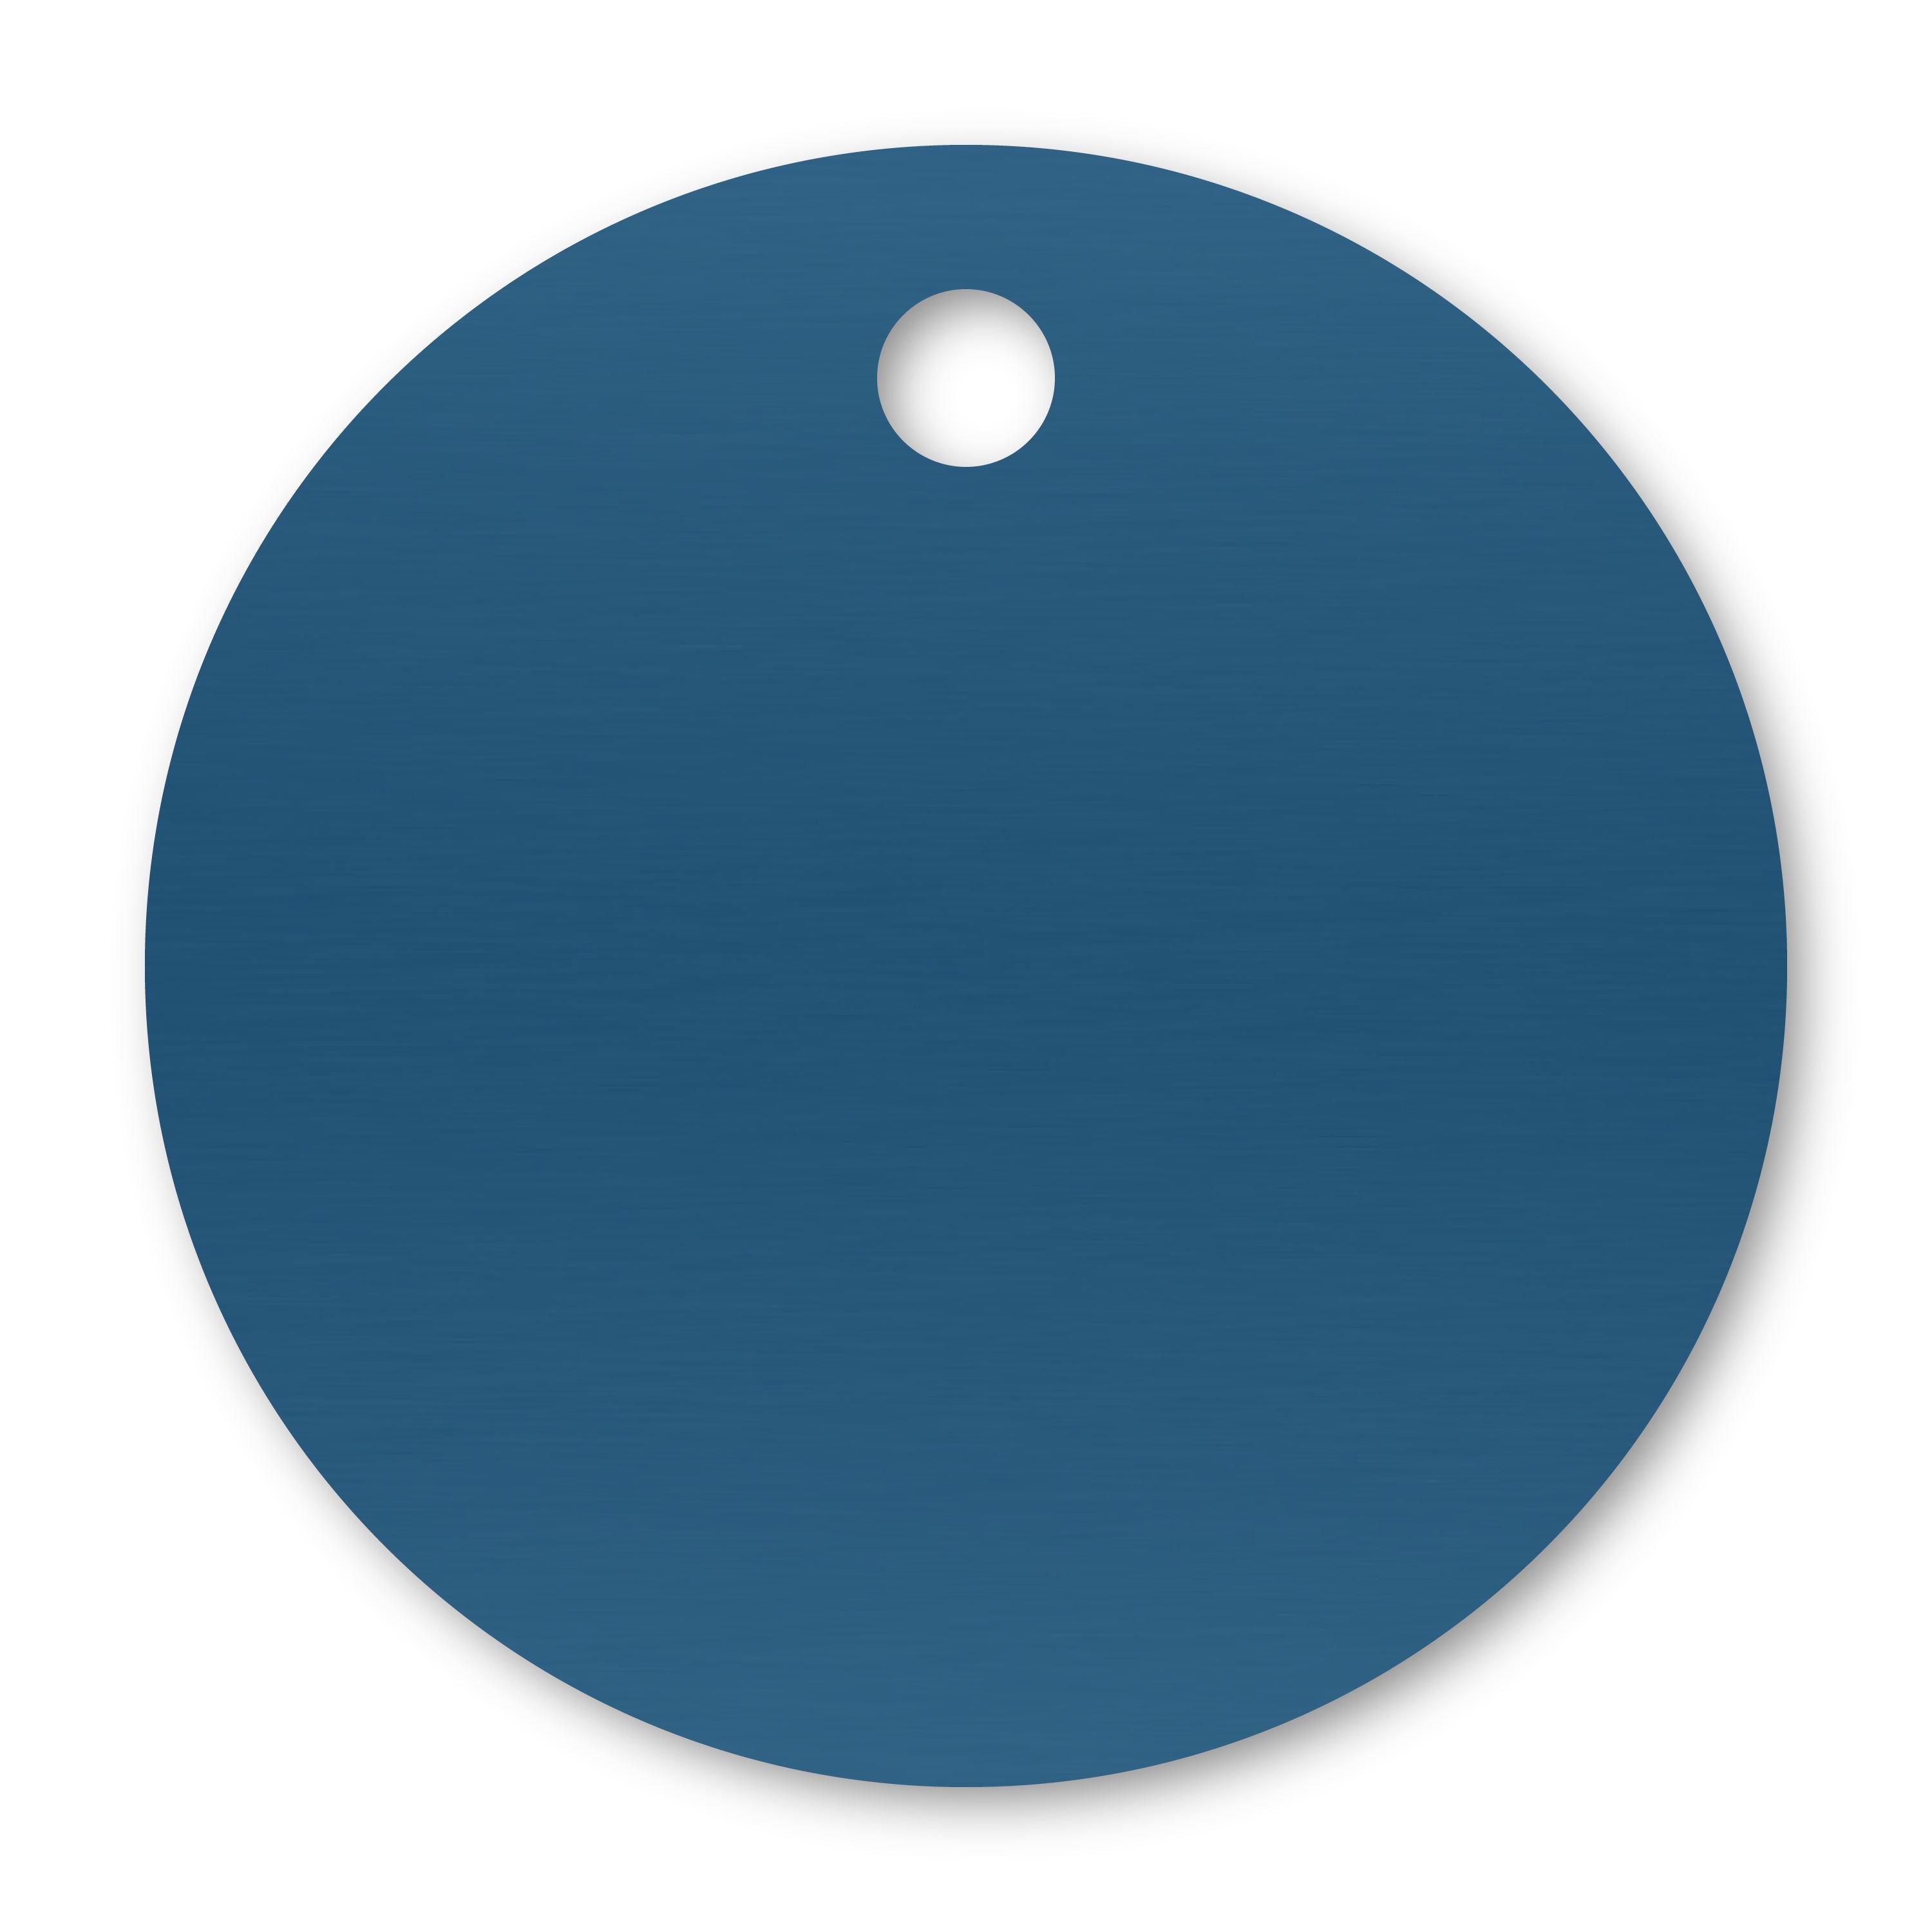 Anodized Aluminum Round Tags, 2" with 3/16" Hole, Laser Engraved Metal Tags Craftworks NW Blue 